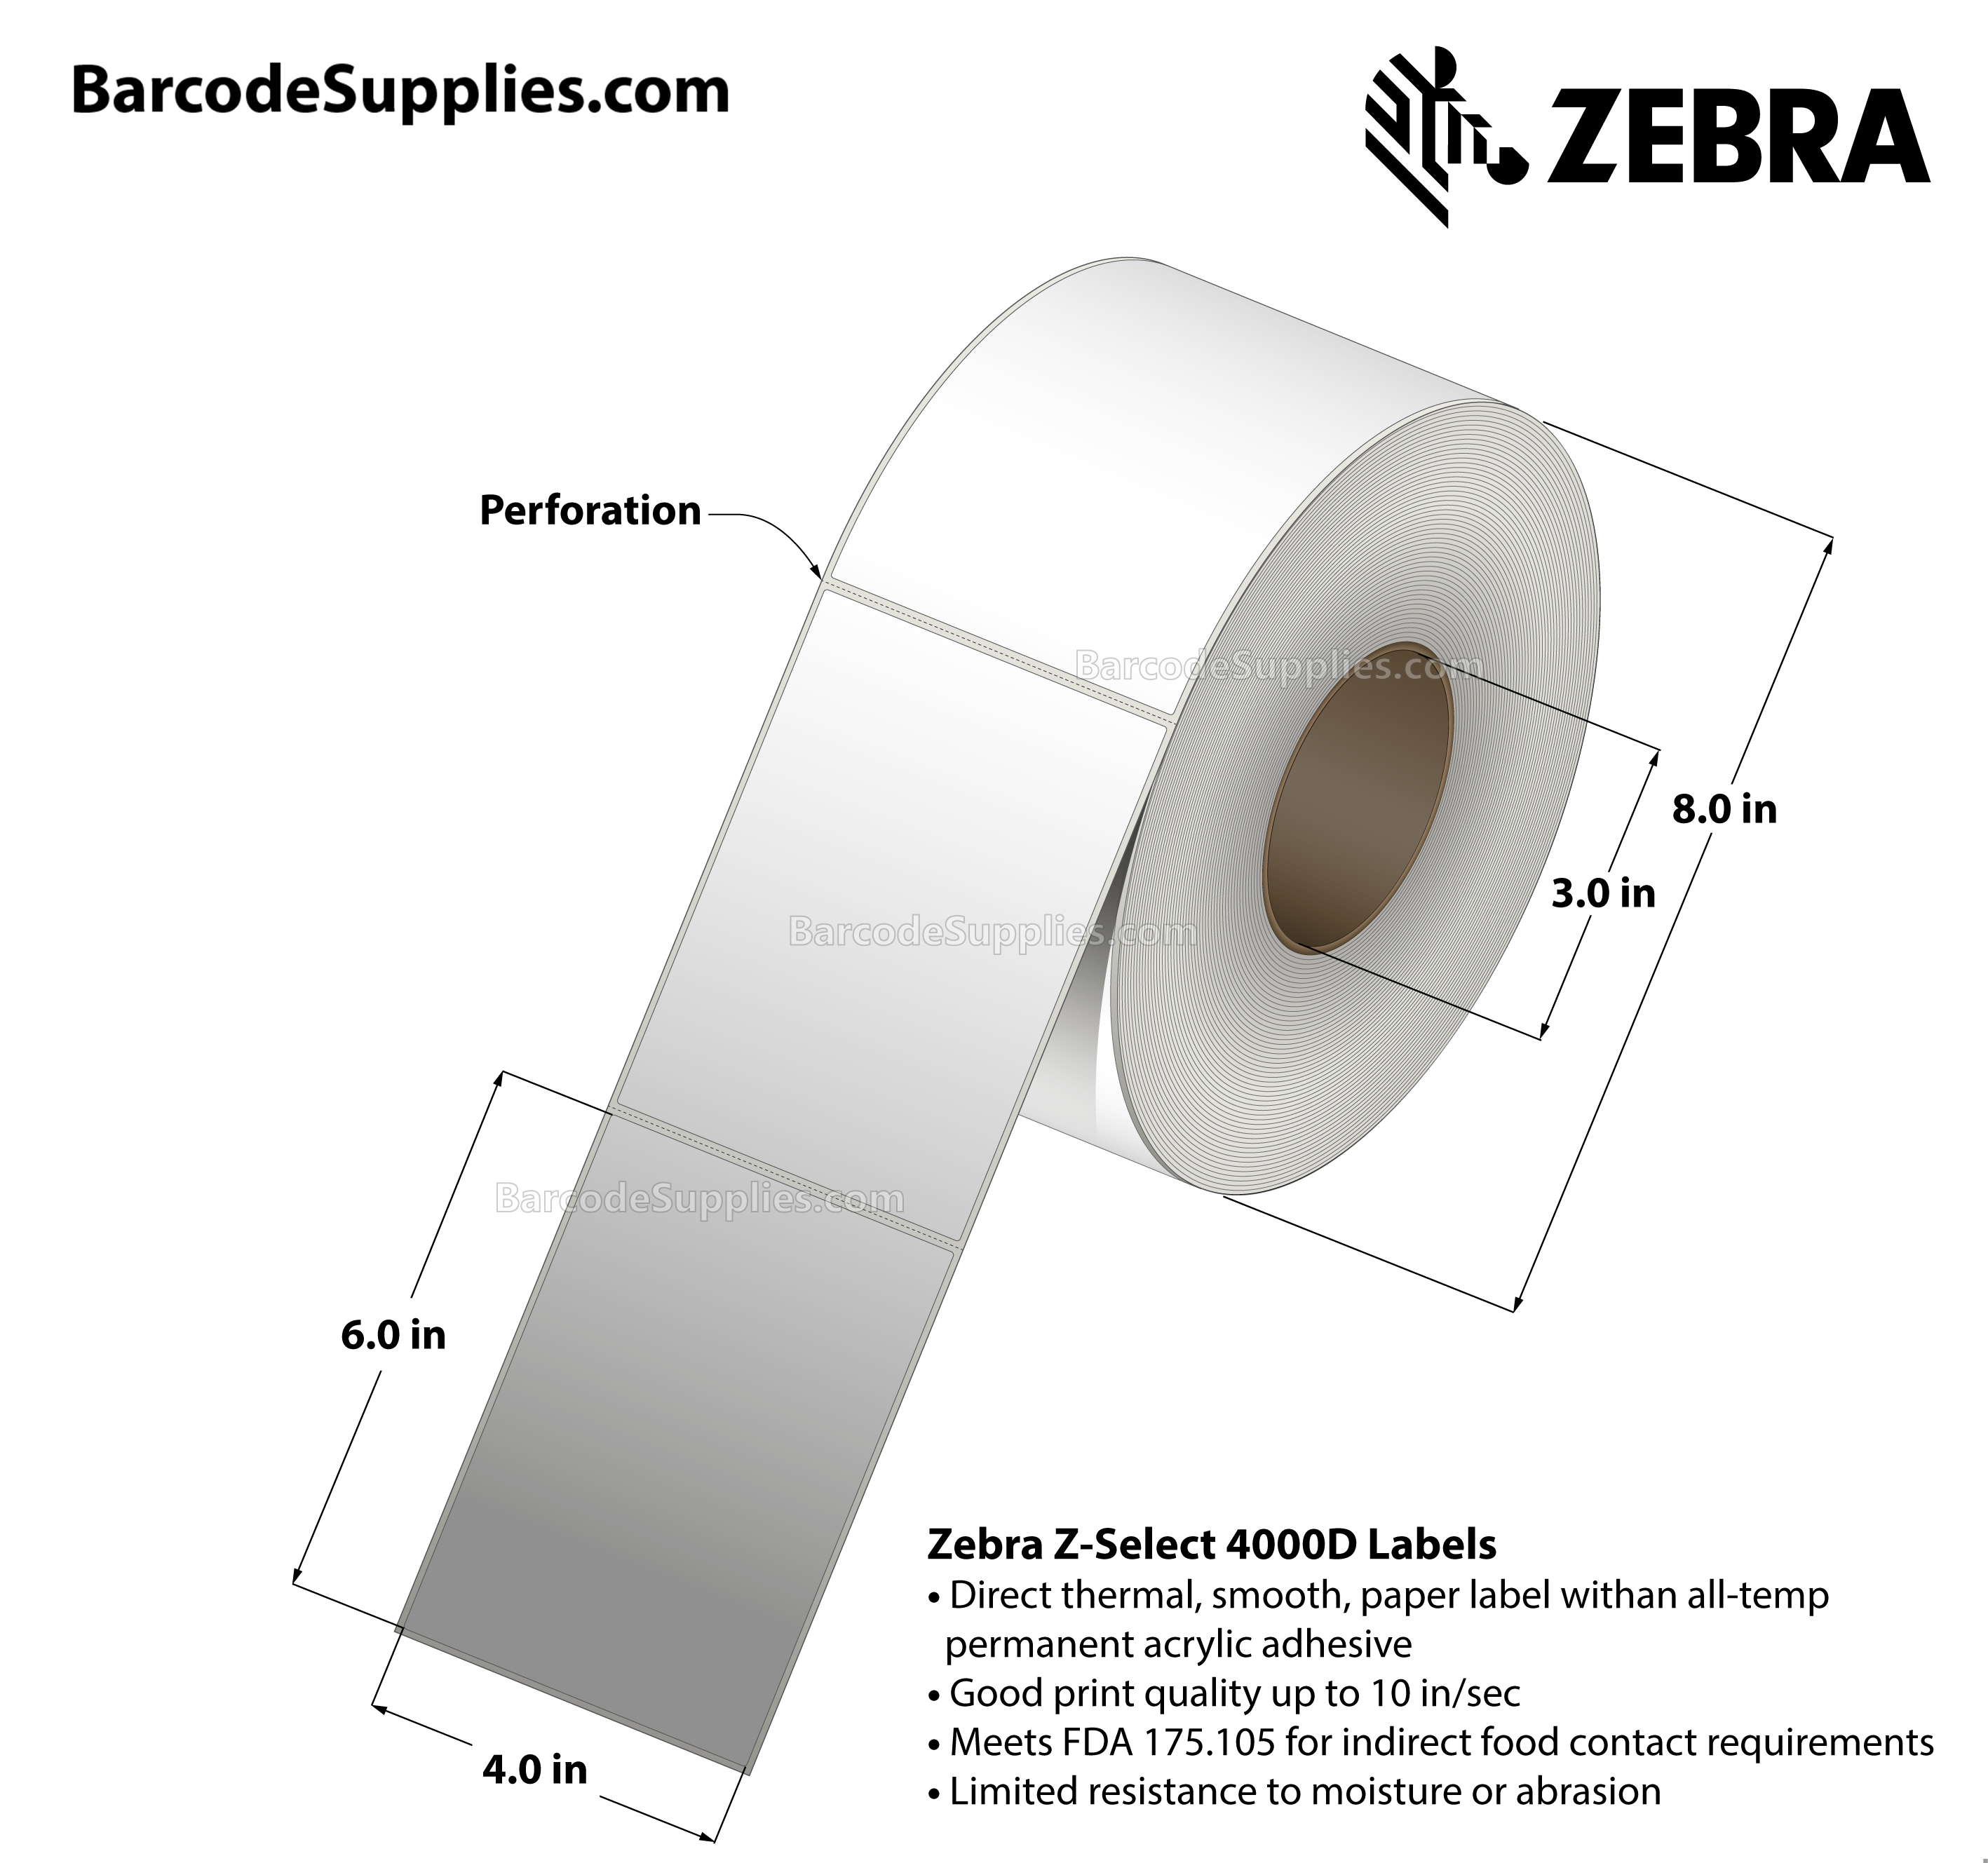 4 x 6 Direct Thermal White Z-Select 4000D Labels With All-Temp Adhesive - Perforated - 940 Labels Per Roll - Carton Of 4 Rolls - 3760 Labels Total - MPN: 98959